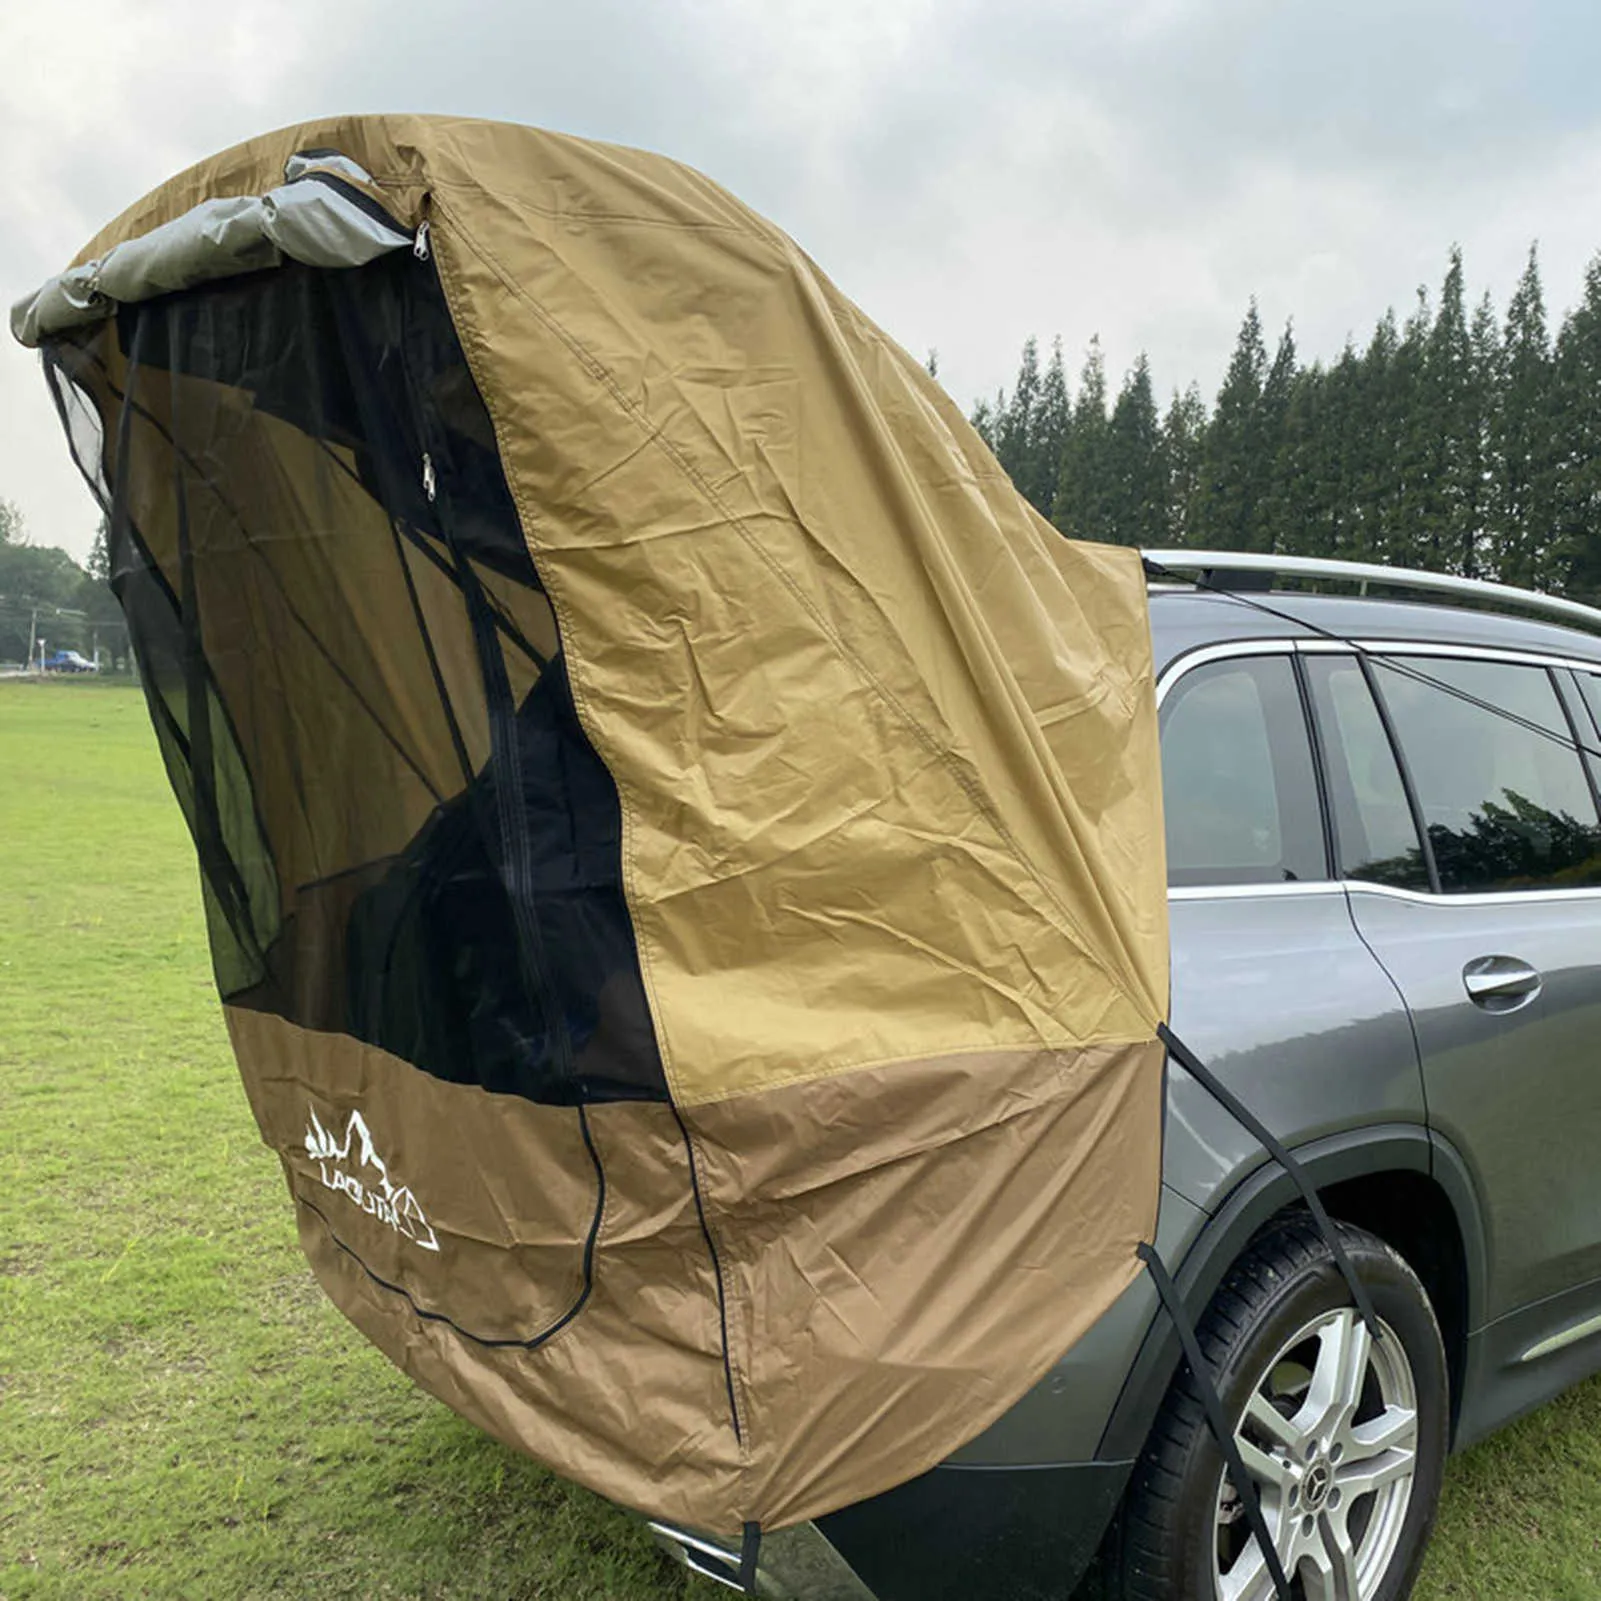 New Car Trunk Tent Sunshade Rainproof Waterproof Tear Resistant Durable Anti-UV Tent Side Awning For Self-driving Tour Barbecue Y0706